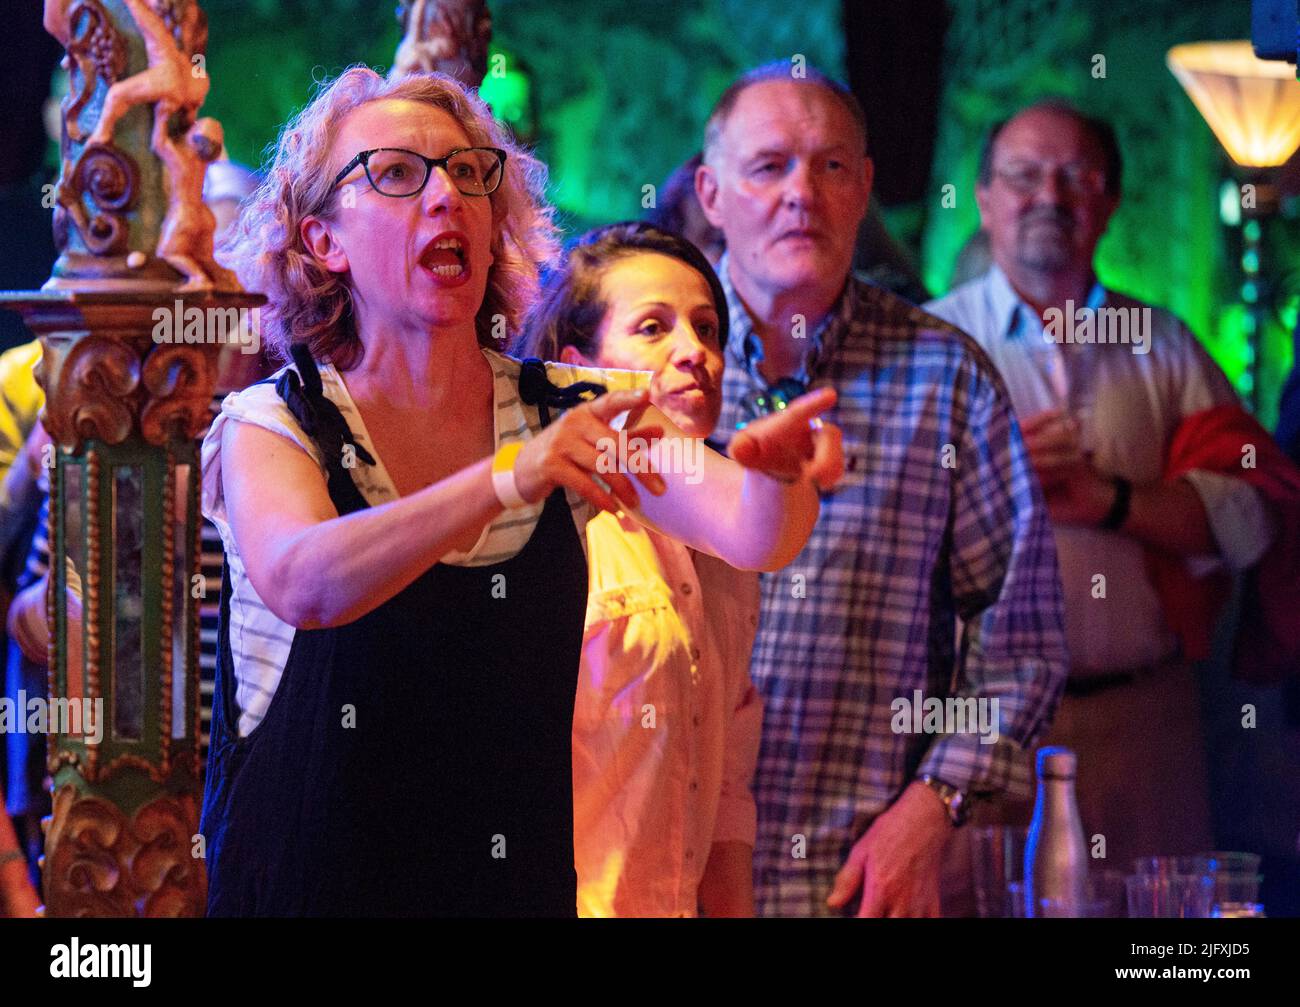 Harrogate, 5th July 2022. The Gipsy Queens playing a live give in the Spiegeltent as part of The Harrogate Festival in froont of a very lively audience. Picture Credit: ernesto rogata/Alamy Live News Stock Photo